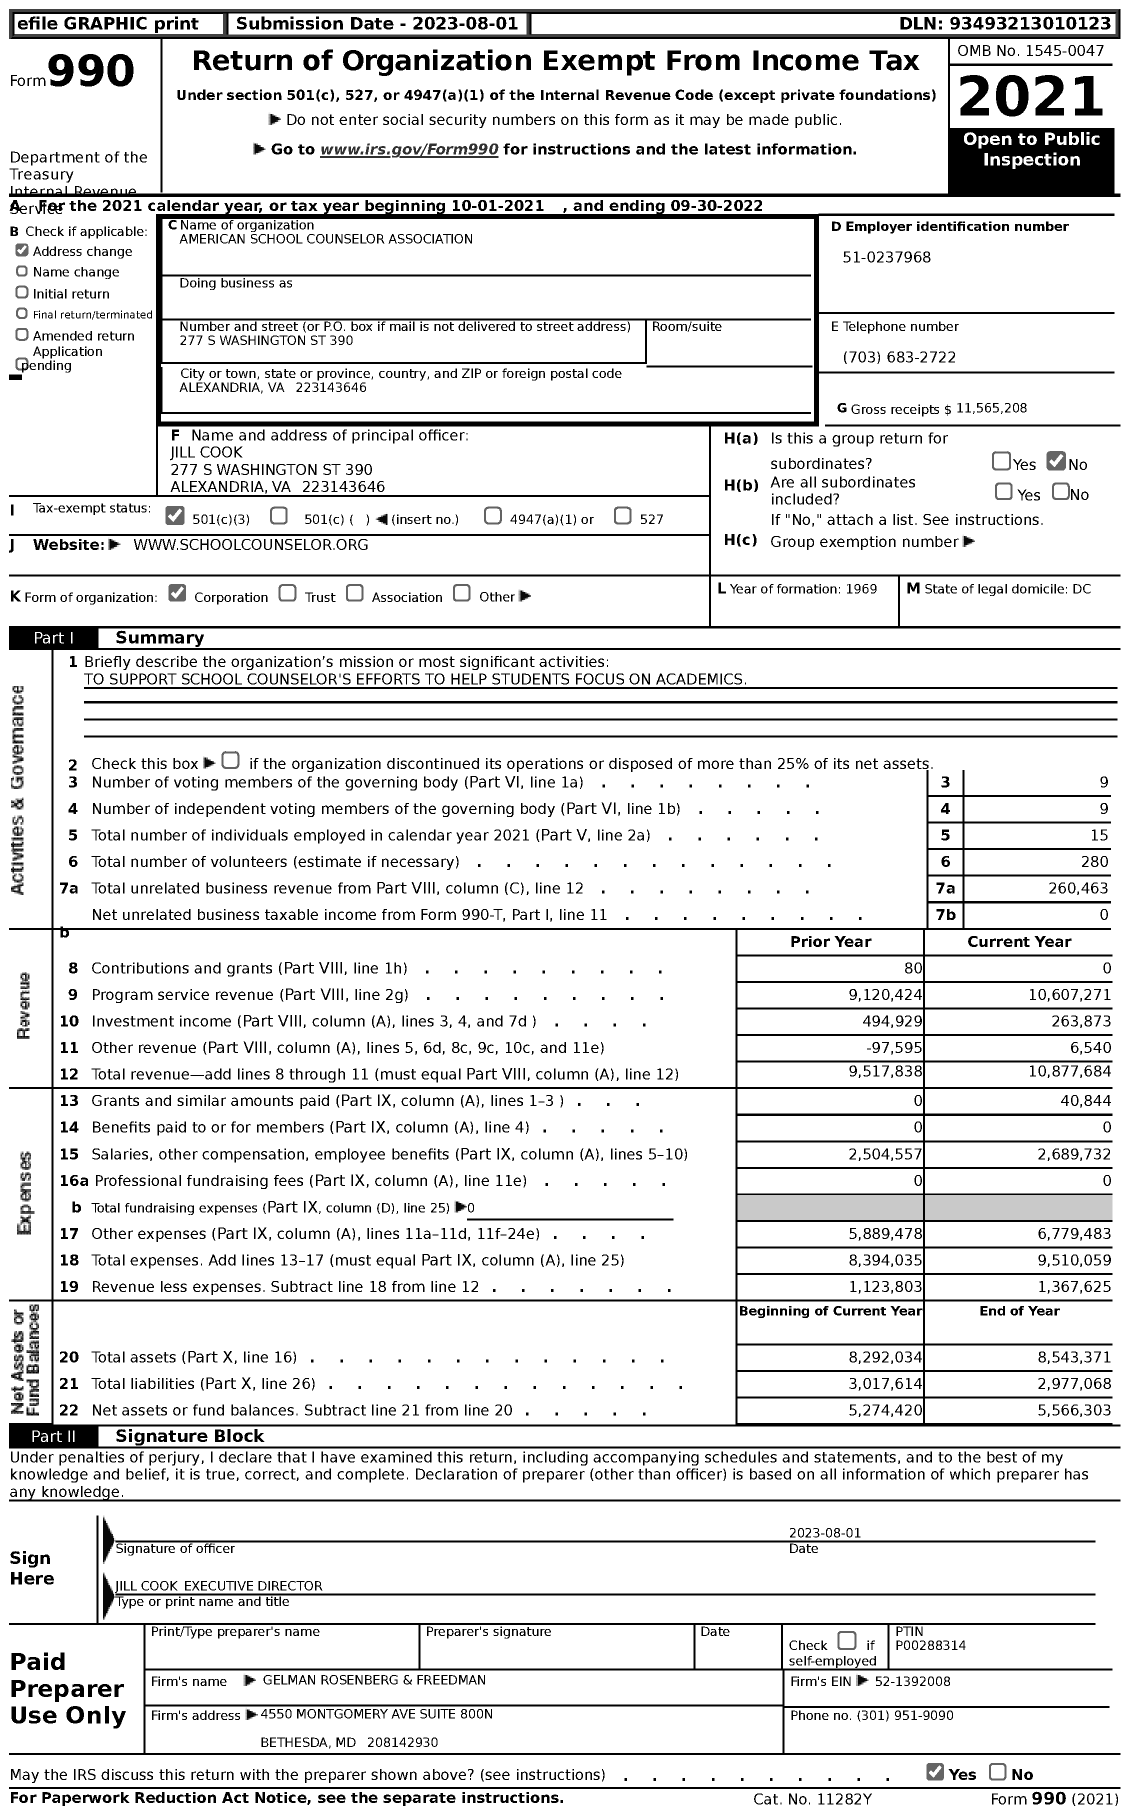 Image of first page of 2021 Form 990 for American School Counselor Association (ASCA)